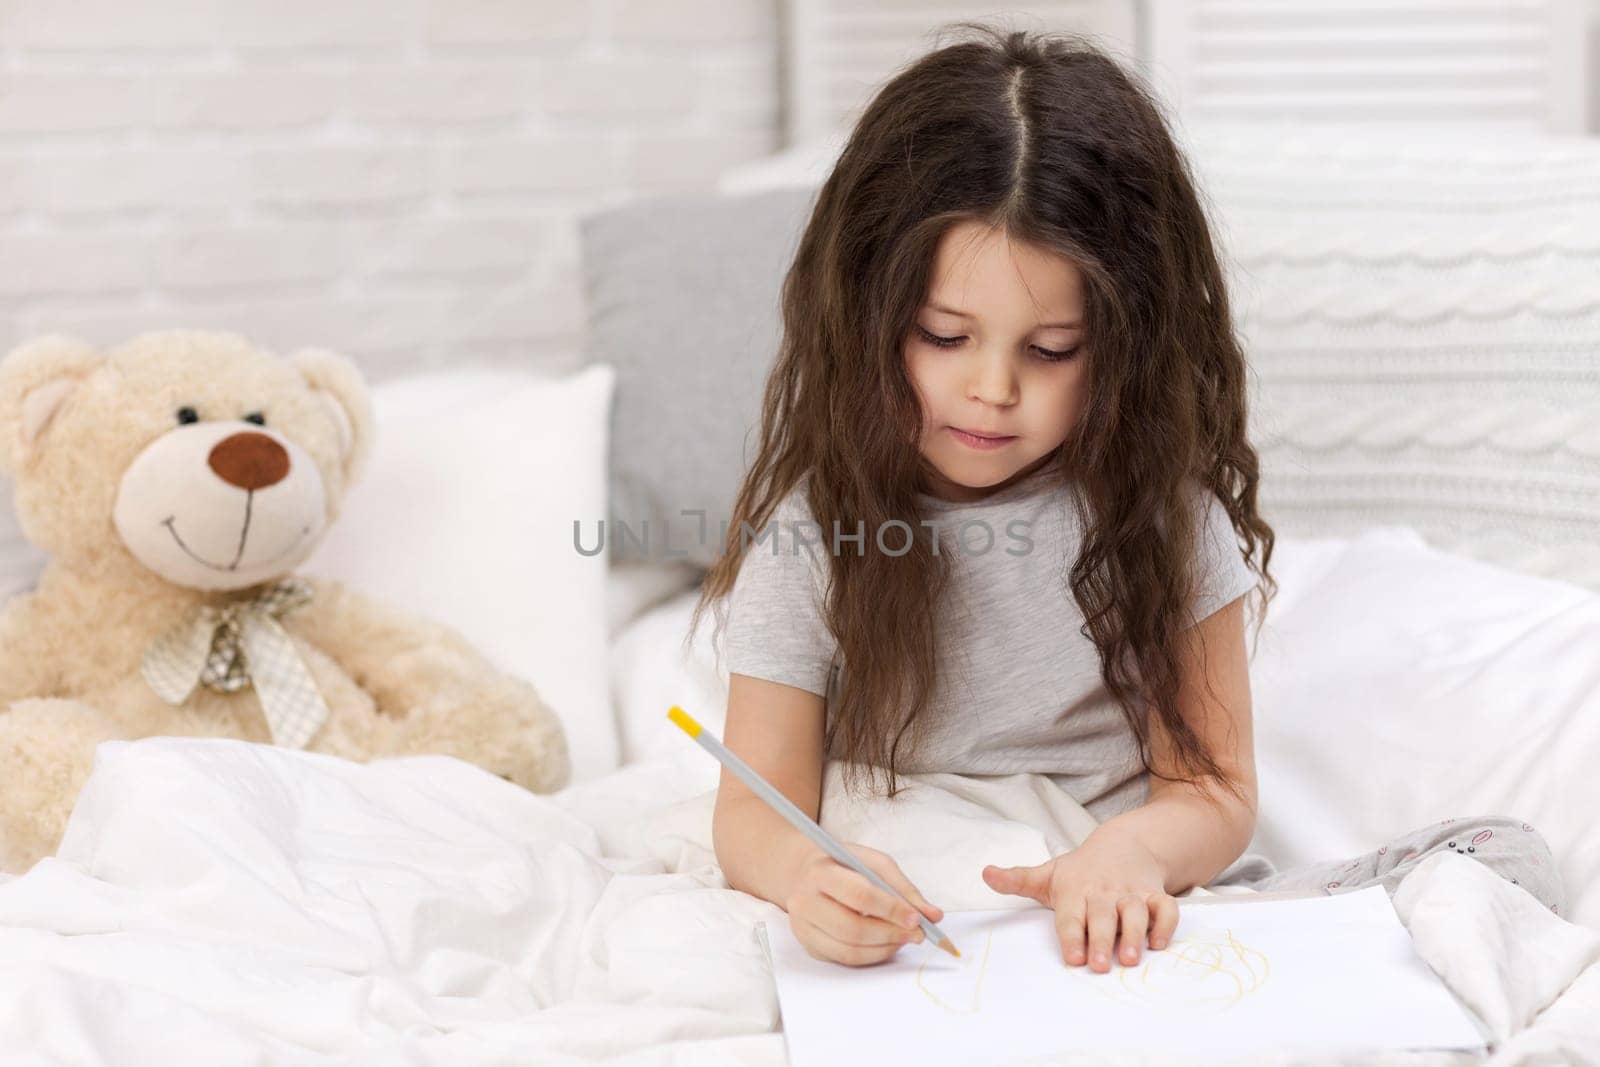 cute little girl with teddy bear drawing pictures while lying on bed. Kid painting at home